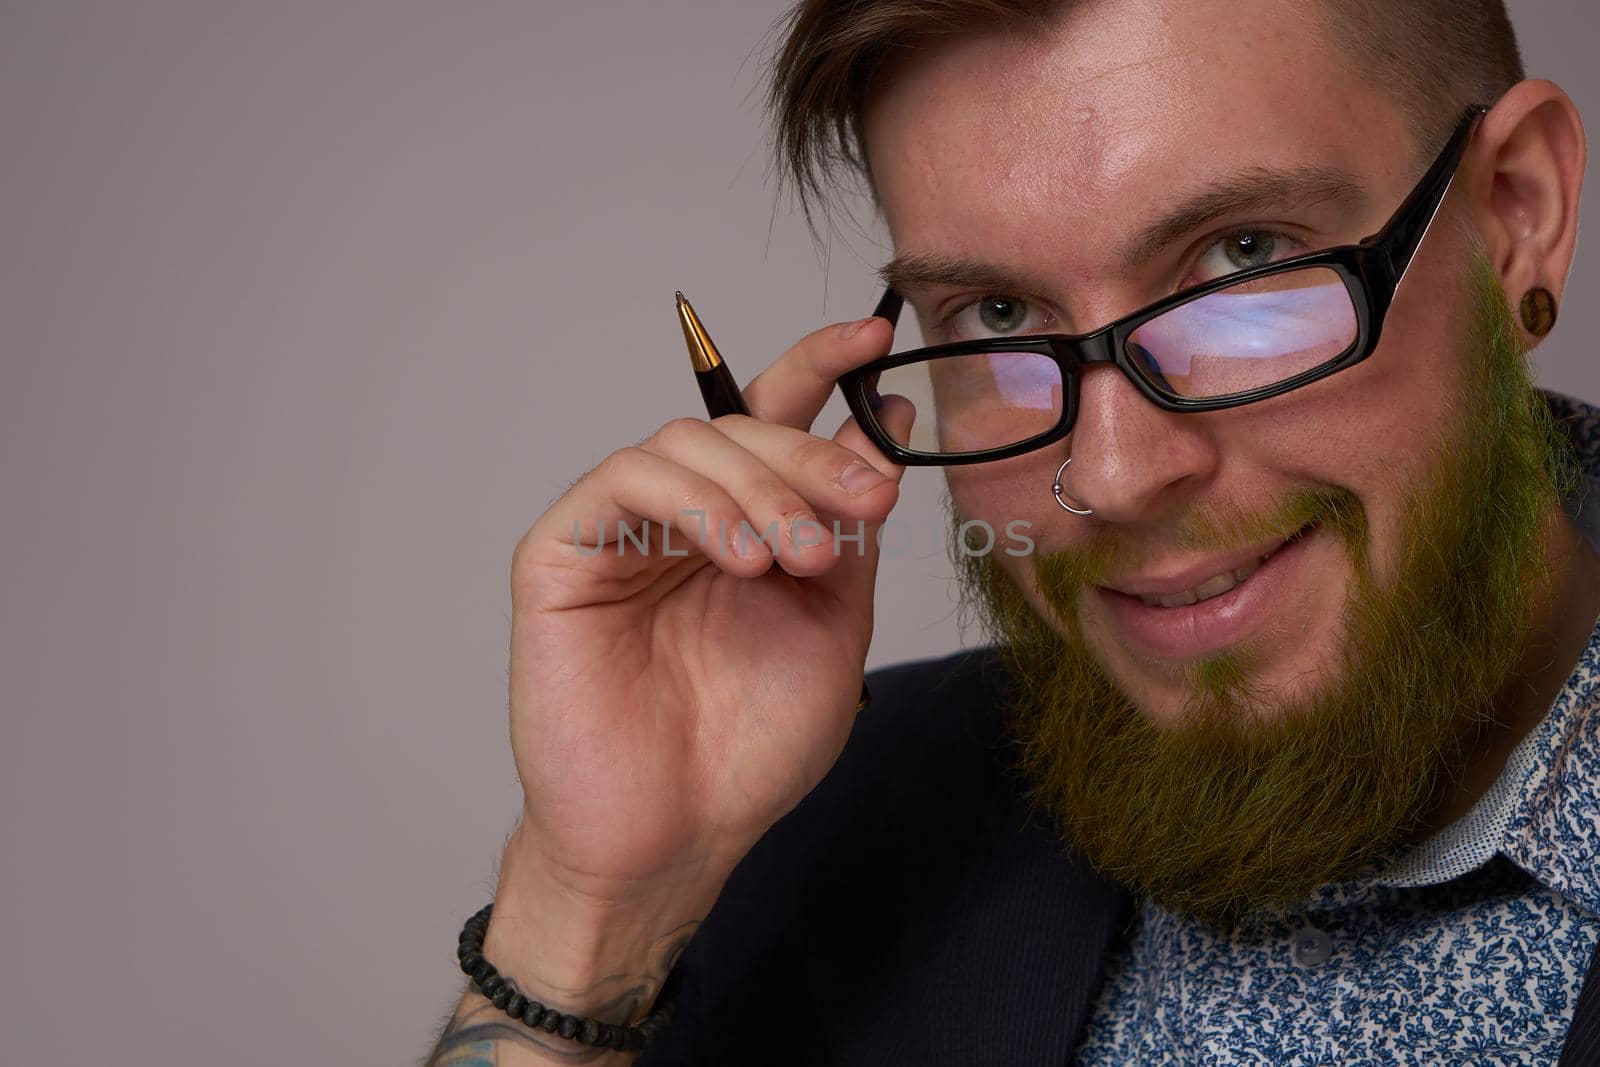 portrait of a business man wearing glasses with a beard posing an official. High quality photo